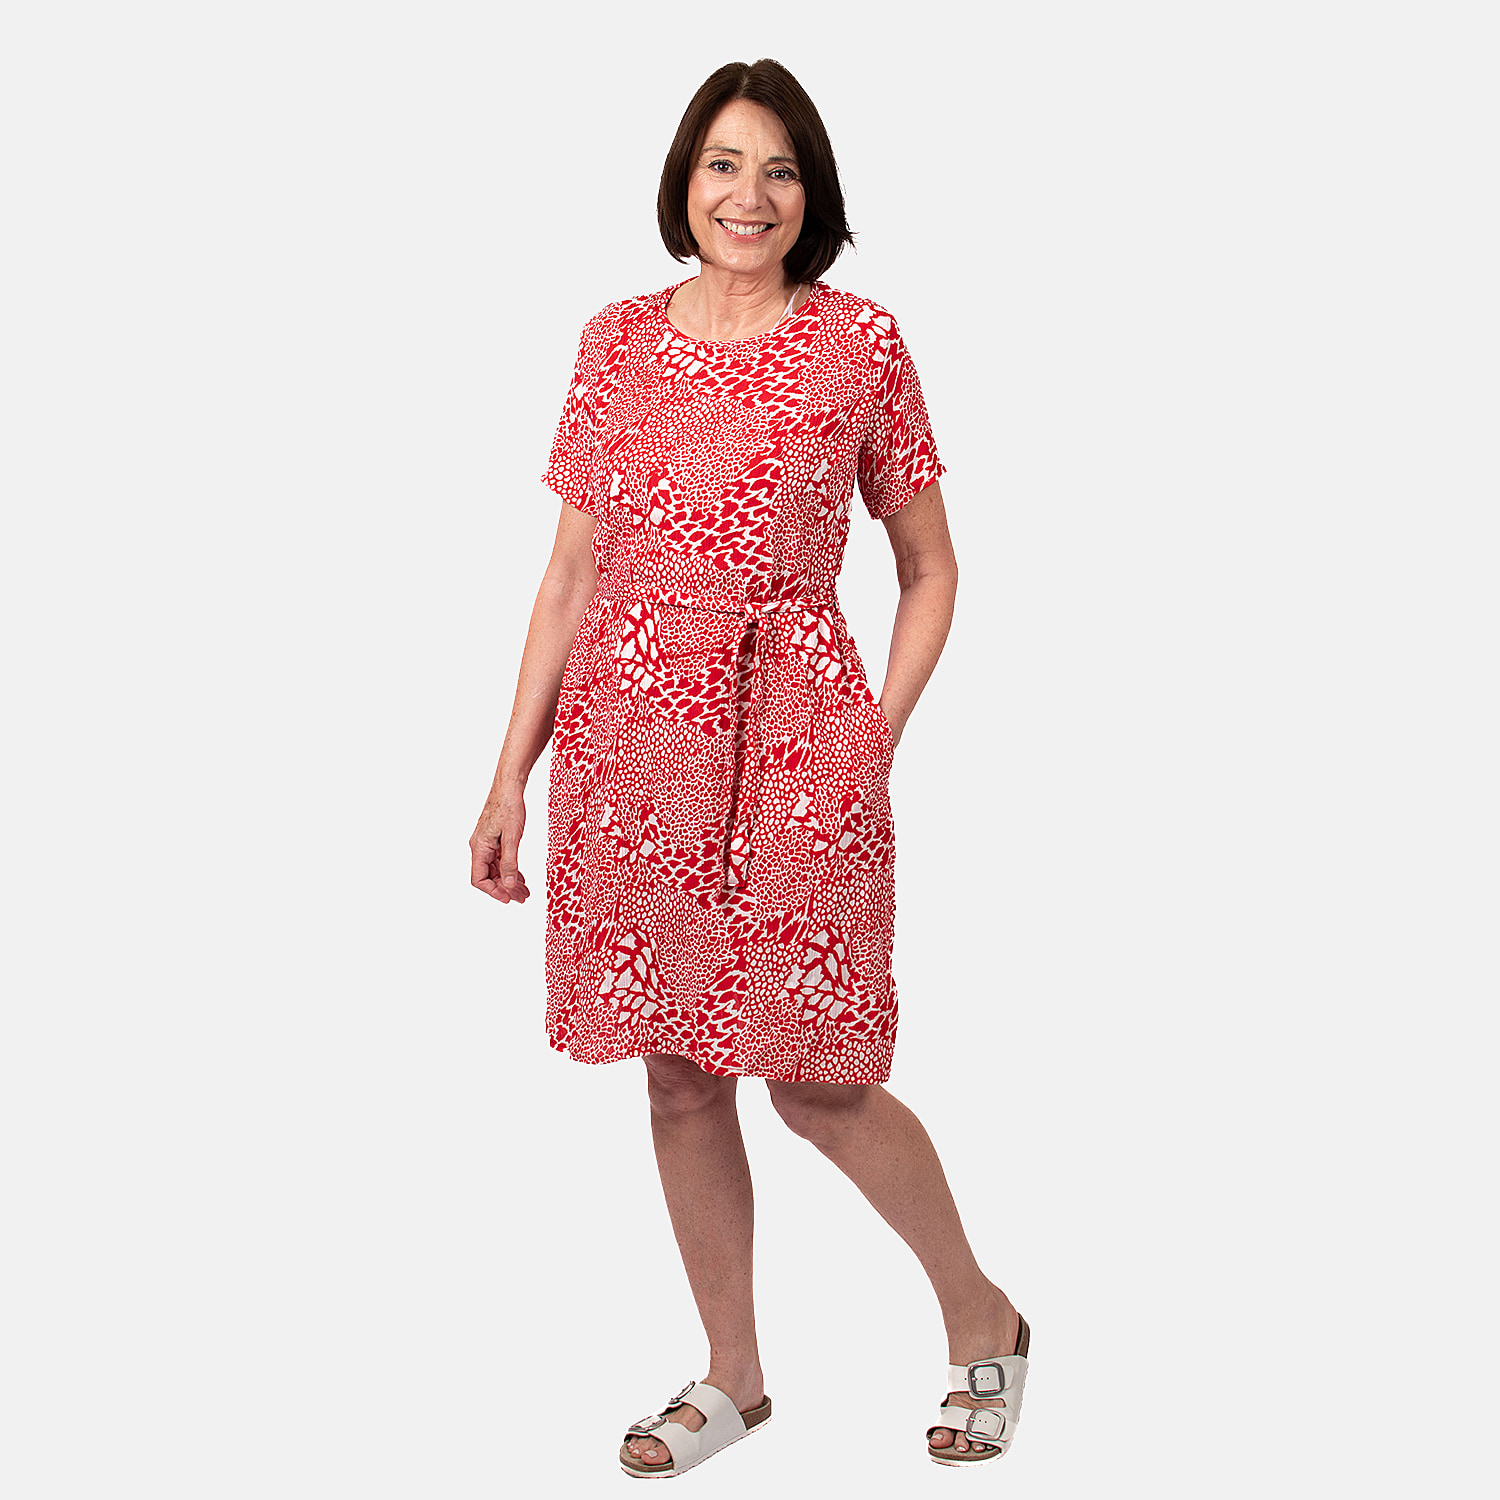 Pure and Natural 100% Viscose Woven Dress (Size S) - Red